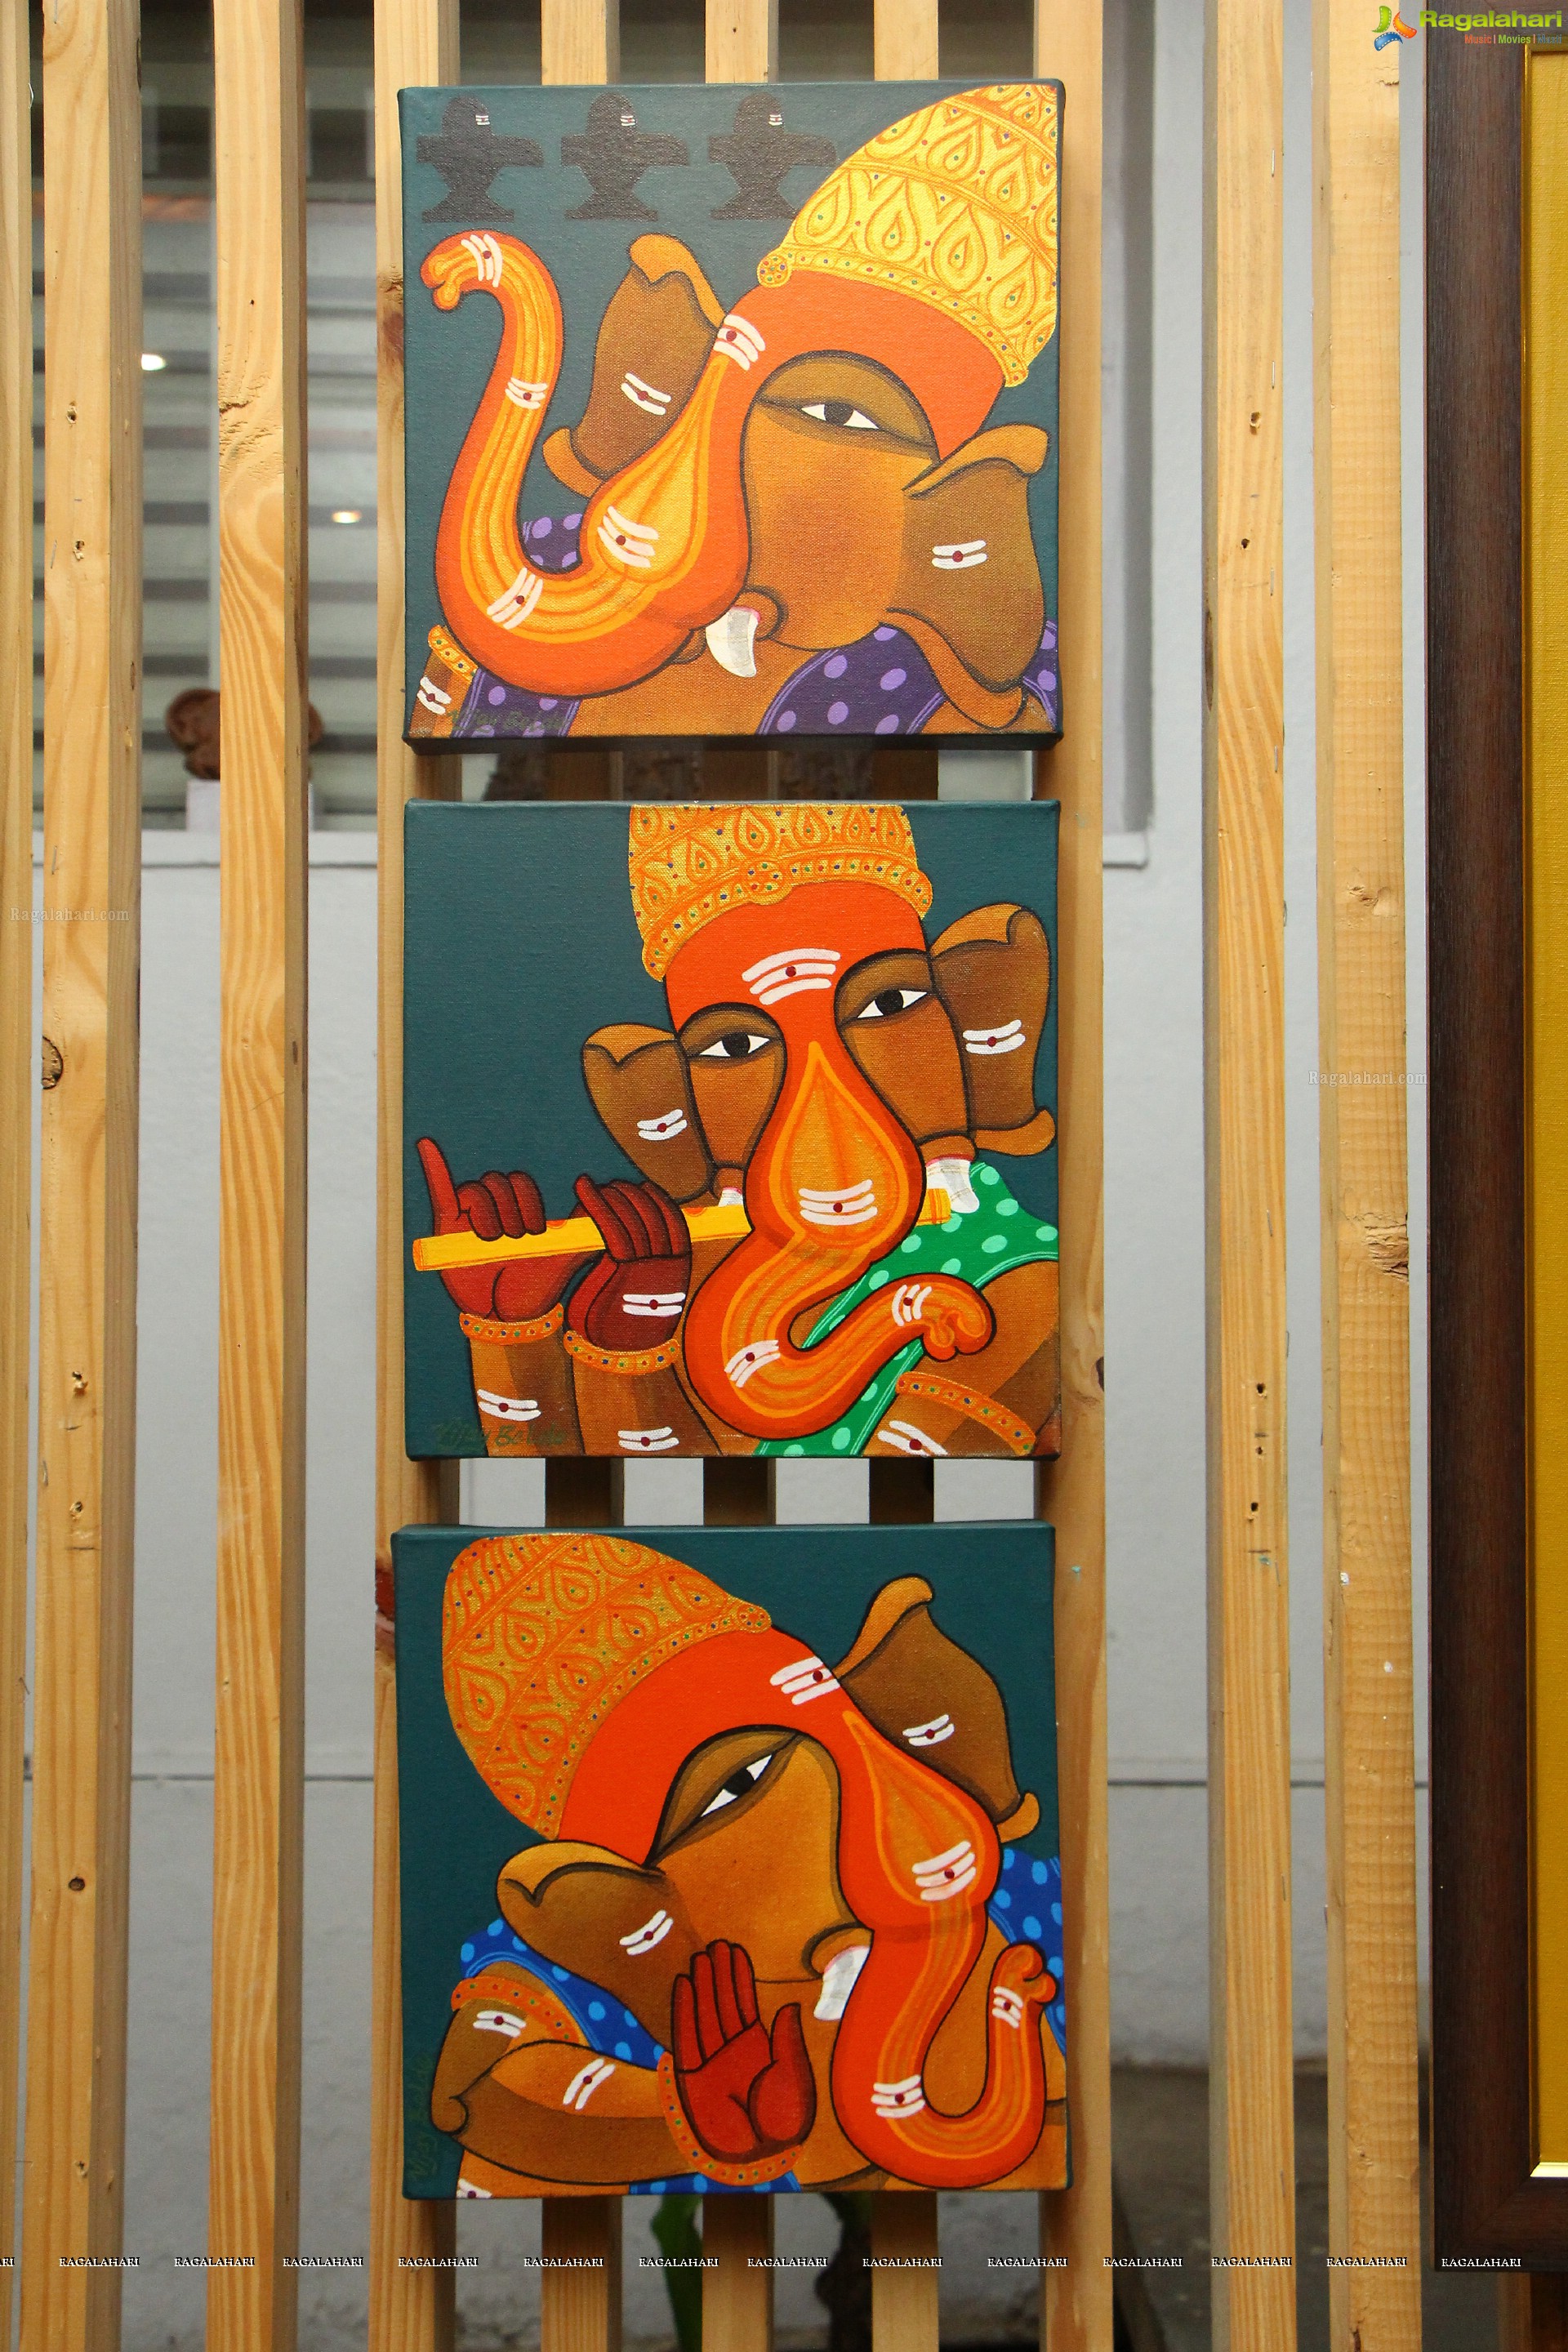 Lord Ganesh in Different Hues at The Gallery Cafe by Bala Bhakta Raju, Om Swami, Siva Balan, Suresh Gulage and Vijay Belde